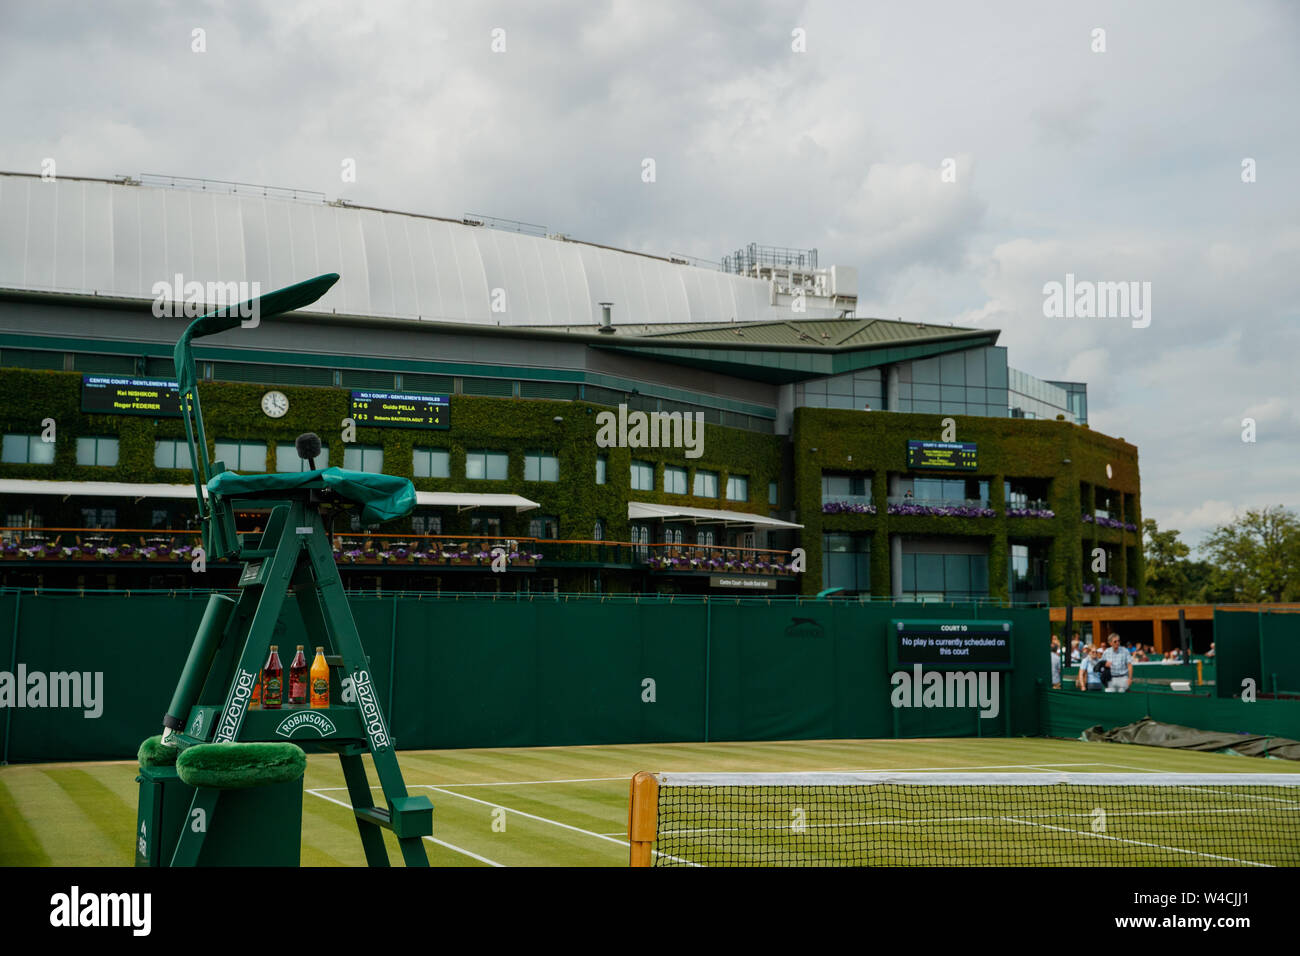 General views of Court 9 and Centre Court during the Wimbledon Championships 2019. Held at The All England Lawn Tennis Club, Wimbledon. Stock Photo